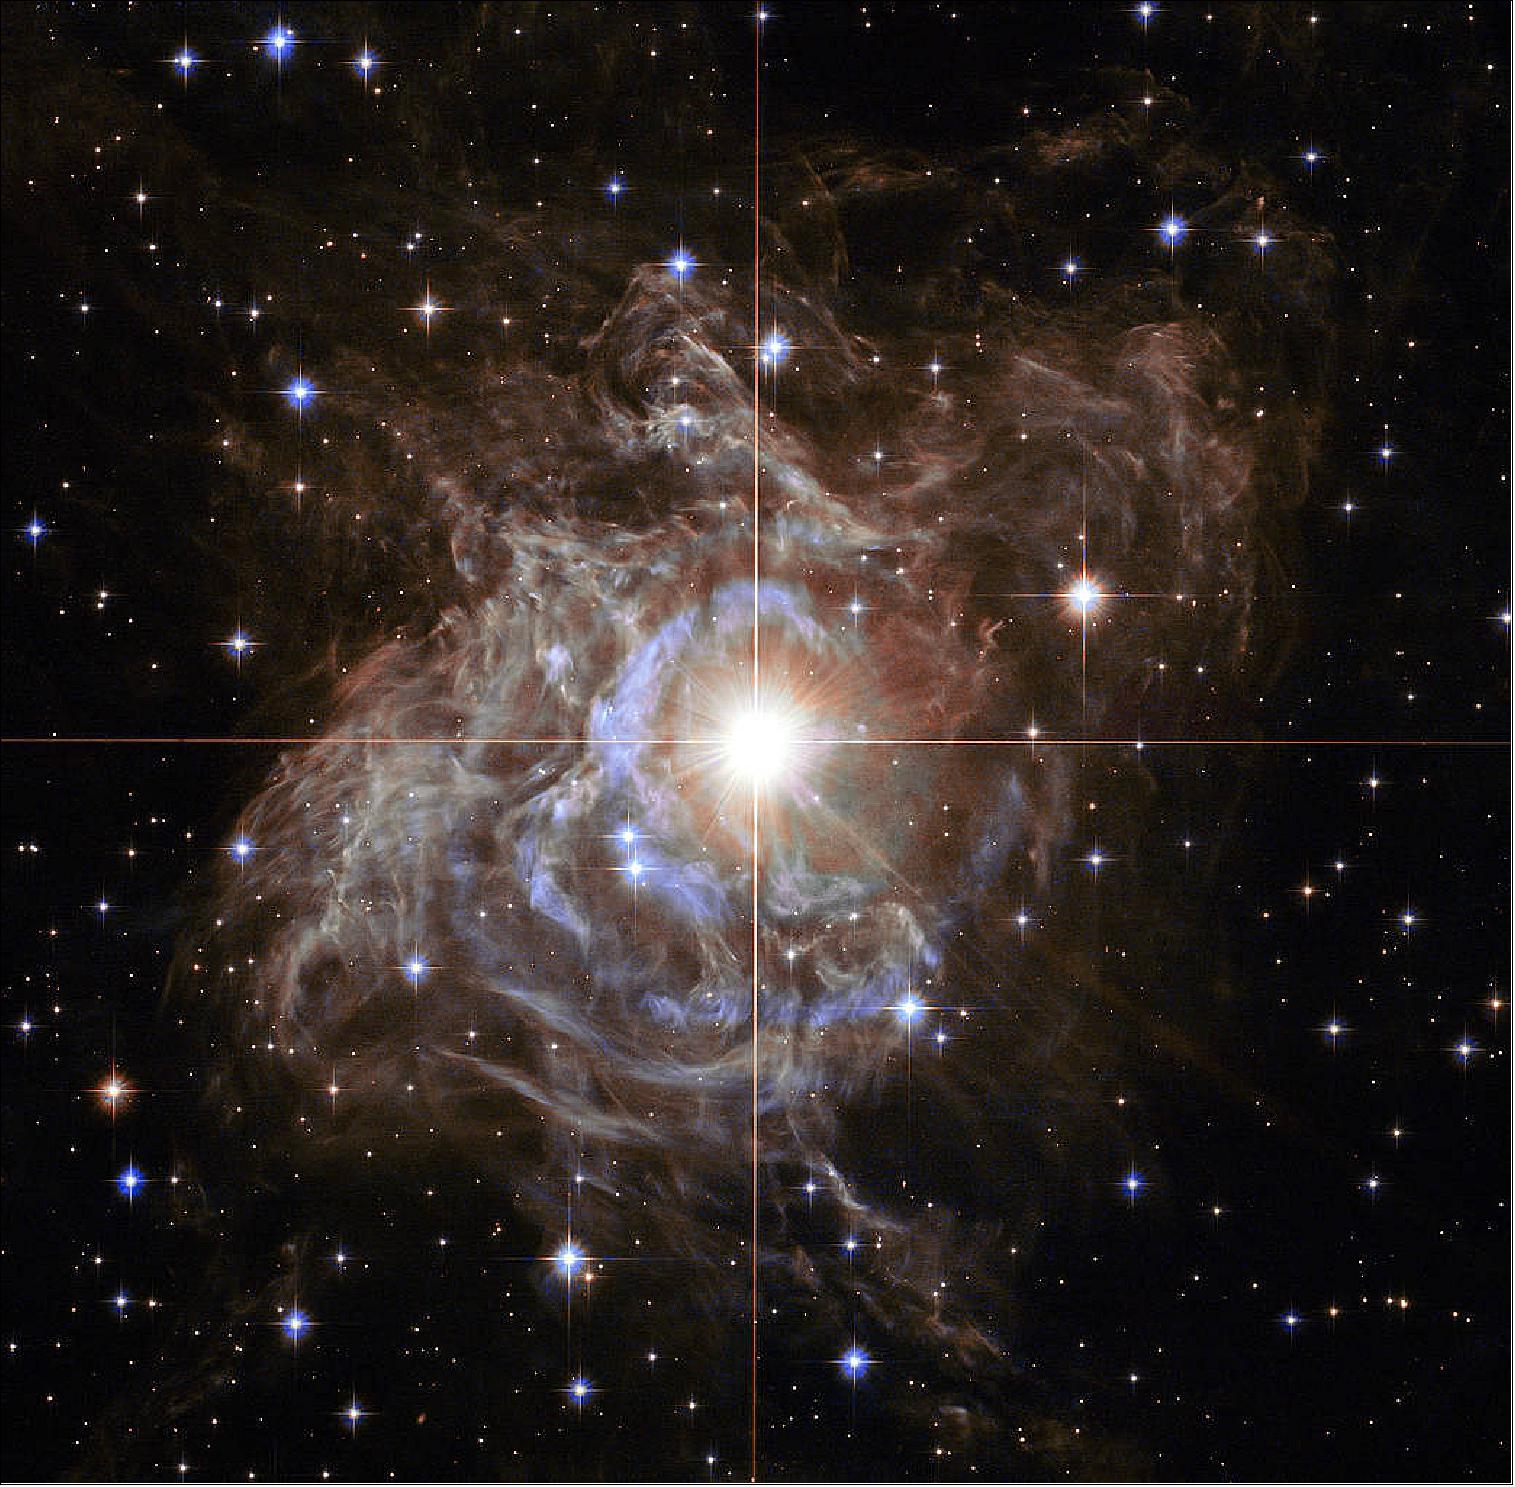 Figure 1: This festive NASA Hubble Space Telescope image resembles a holiday wreath made of sparkling lights (image credit: NASA, ESA and the Hubble Heritage Team (STScI/AURA) – Hubble/Europe Collaboration; Acknowledgement: H. Bond (STScI and Pennsylvania State University)